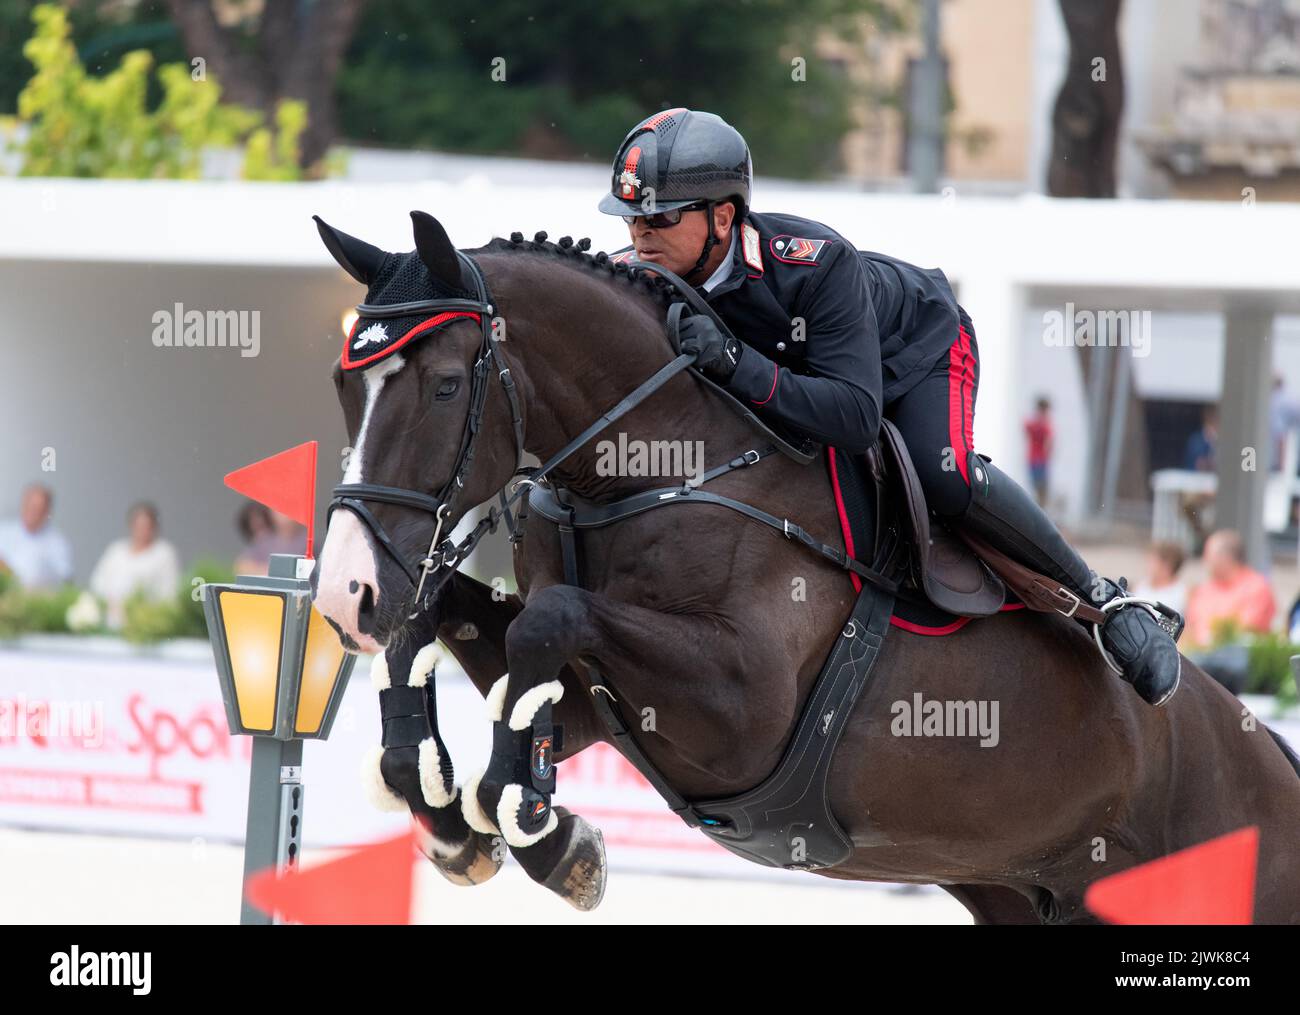 Military sportsman riding horse jumping during equestrian competition. Rome, Italy, 2-4 september 2022, Equestrian Jumping Championship Stock Photo